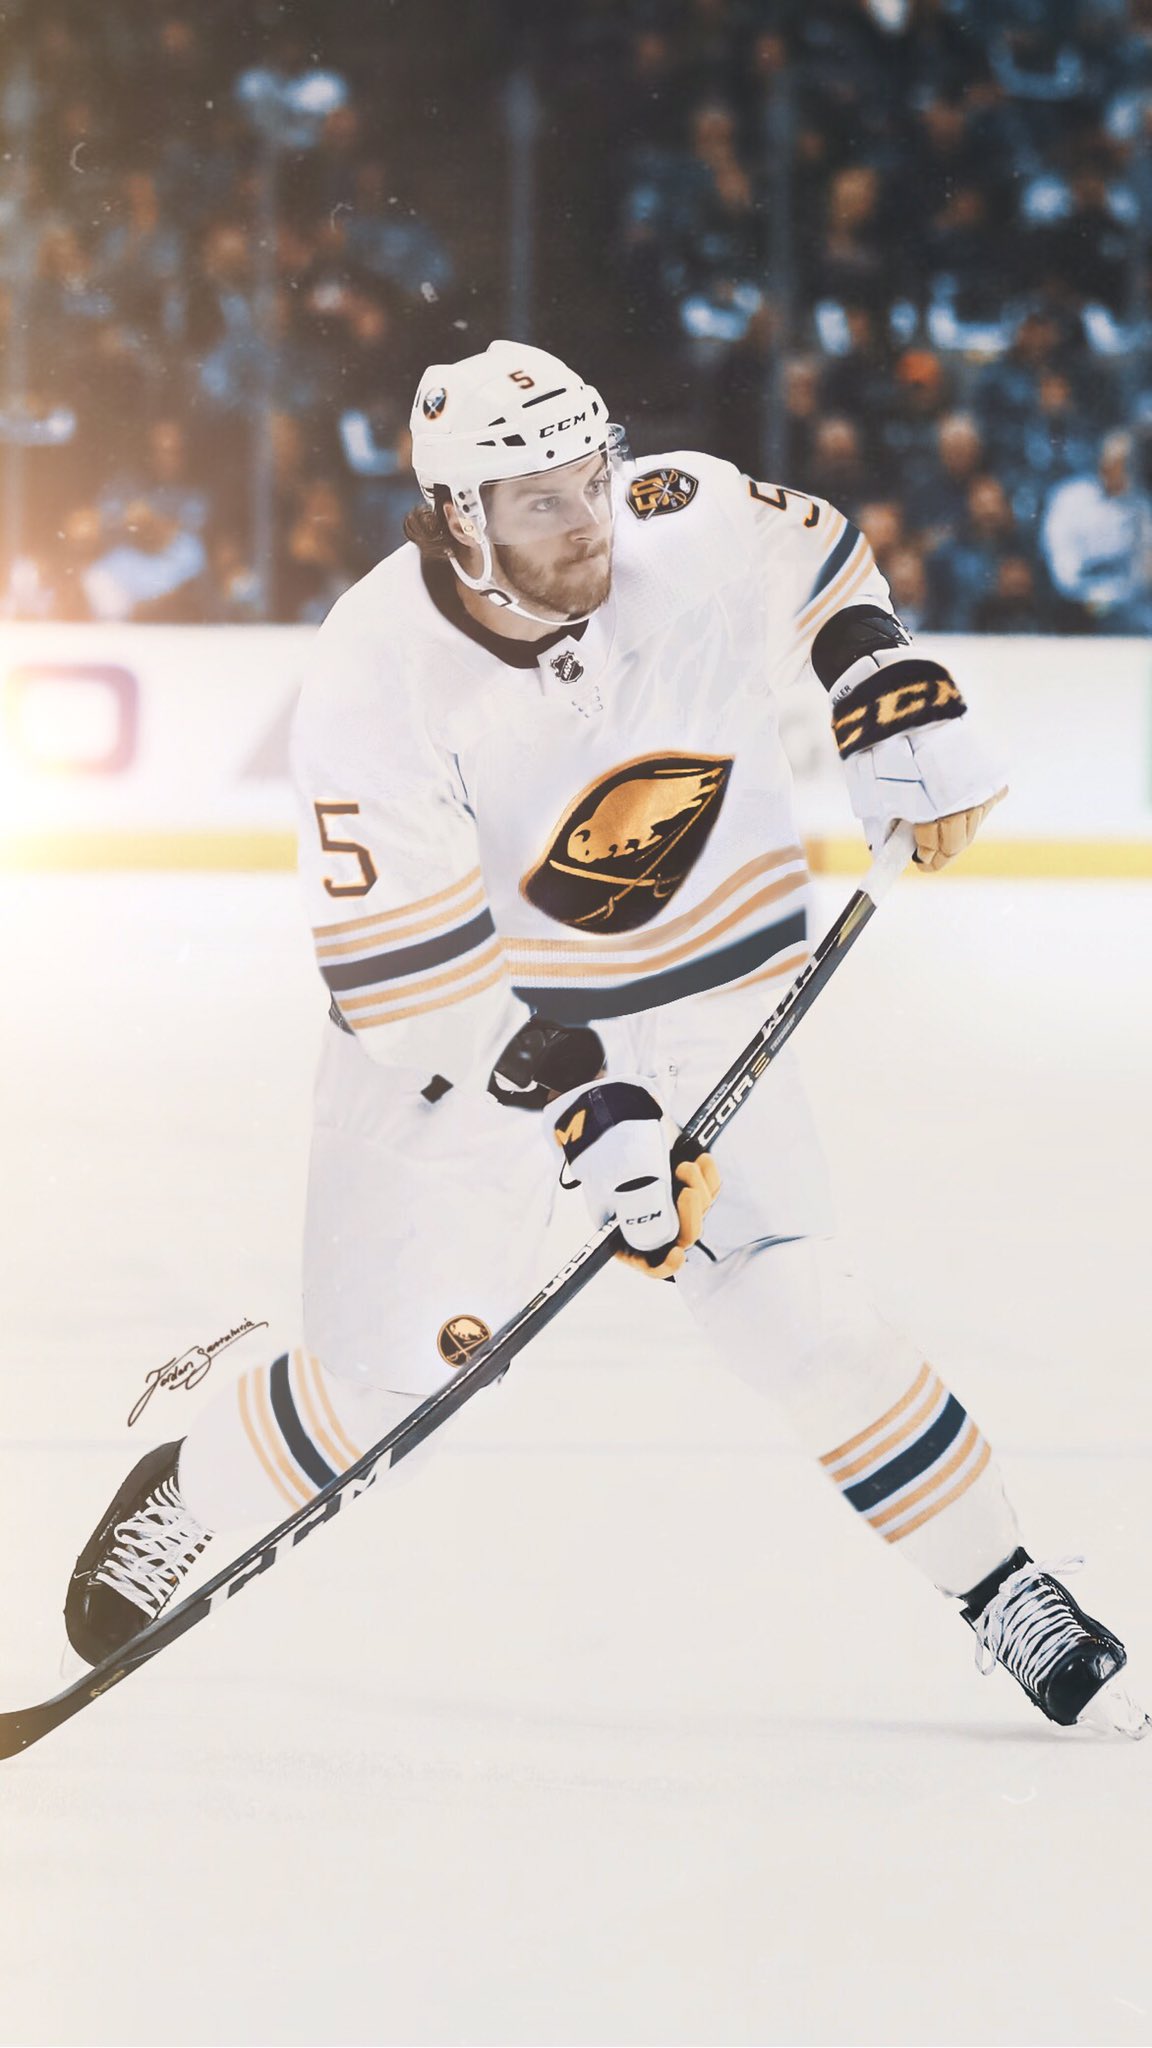 Jordan Santalucia on X: Buffalo Sabres 50th anniversary jersey mock-up and  Colin Miller jersey swap, based off the leak. Full uniform is rumored to  include white pants and gloves. #Sabres50 #Sabres  /